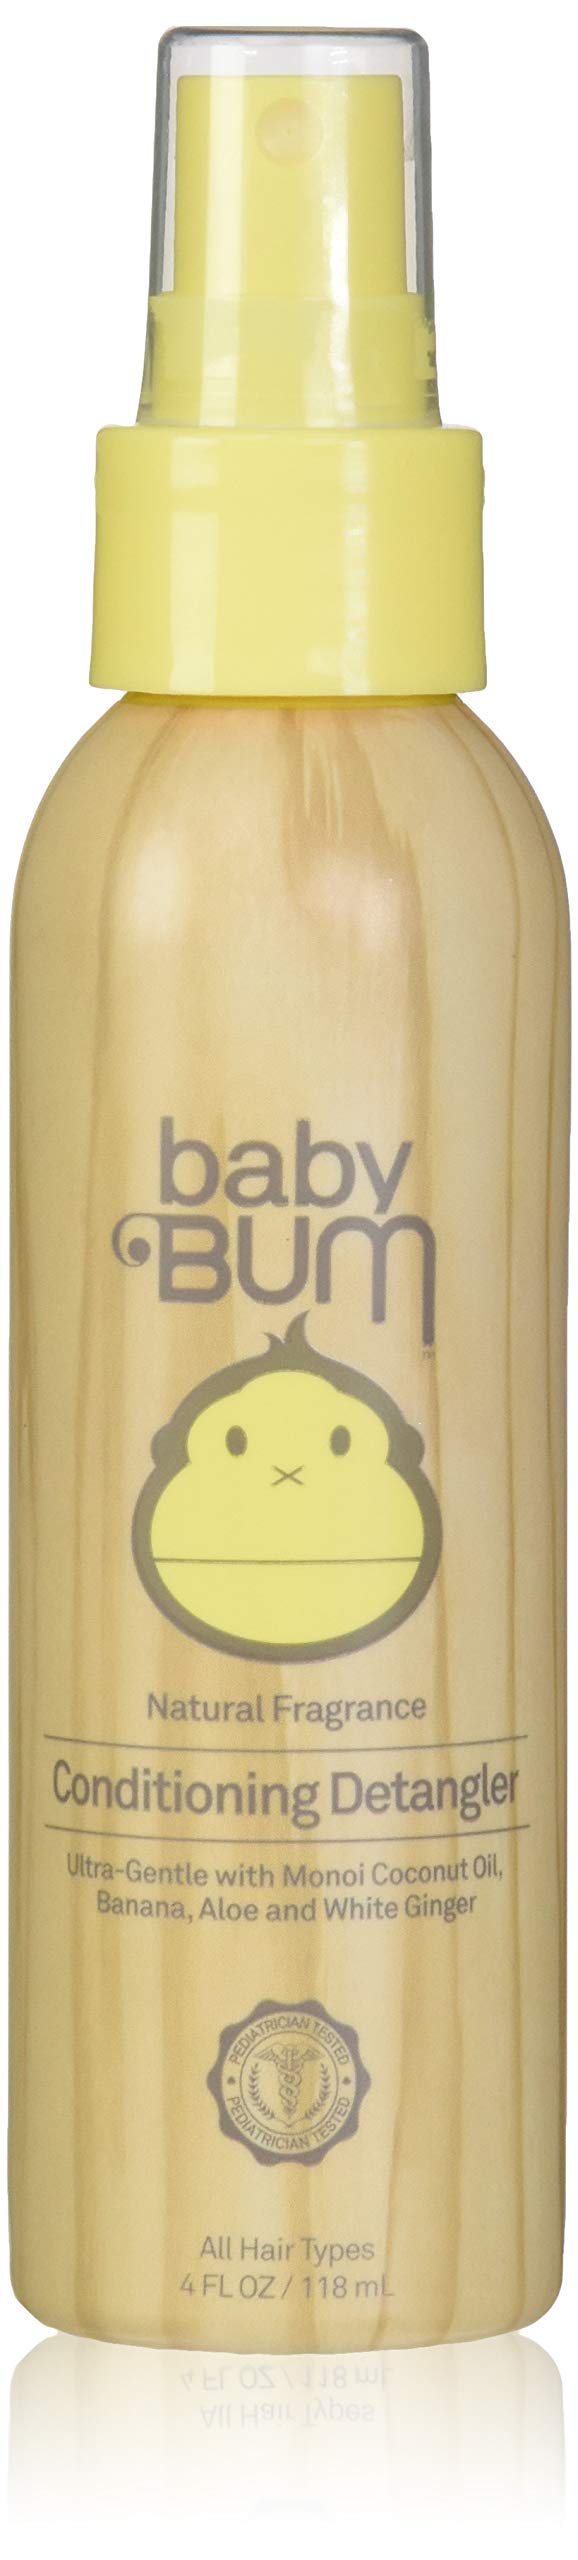 Baby Bum Baby Bum Conditioning Detangler Spray - Leave-in Conditioner â€“ Natural Fragrance - Gentle & Safe With Soothing Coconut Oil - 4 Fl Ounce, 4 Fluid Ounce (Pack Of 6)